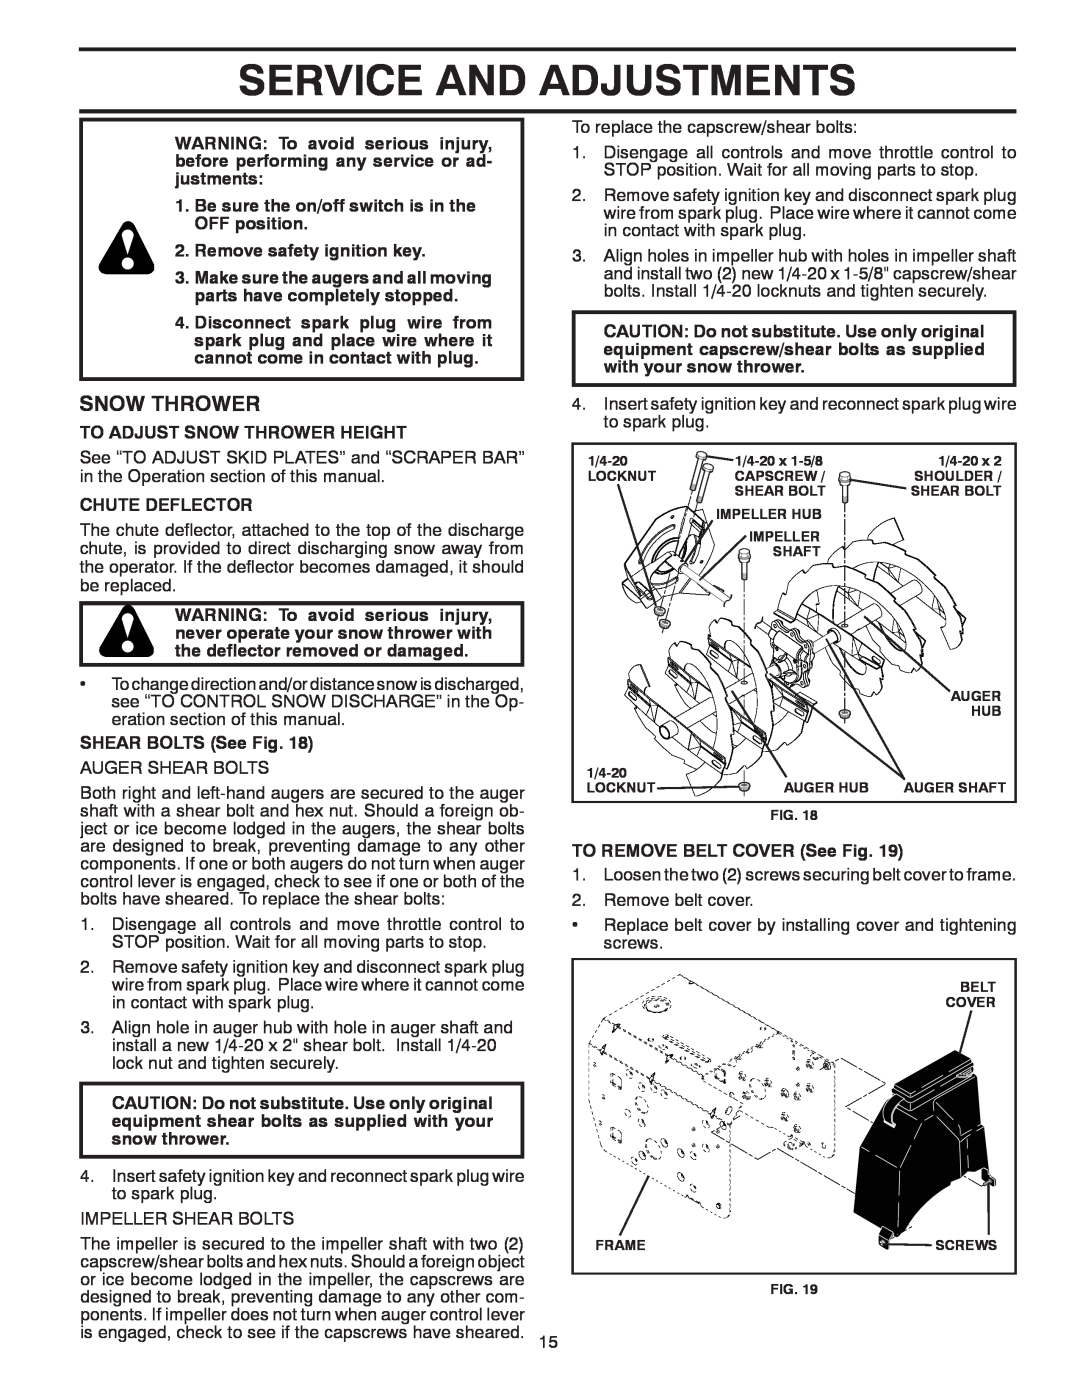 McCulloch MC12527ES owner manual Service And Adjustments, Remove safety ignition key, To Adjust Snow Thrower Height 